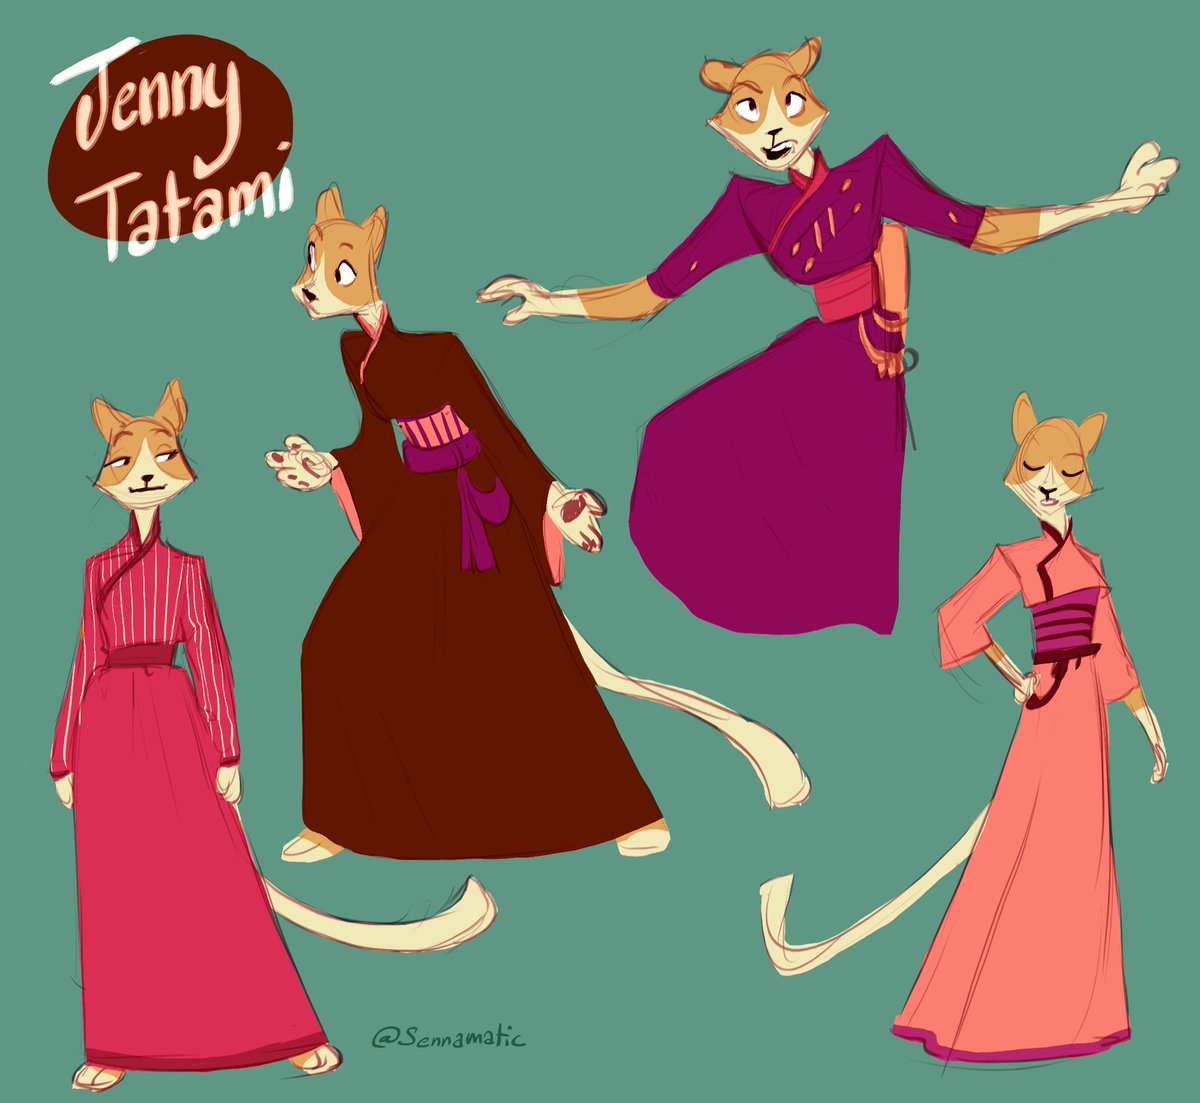 RT @sennamatic: I never posted Jenny! She's the newest addition to those fashion Felines I was drawing weeks ago! https://t.co/aLoR5GgFpb